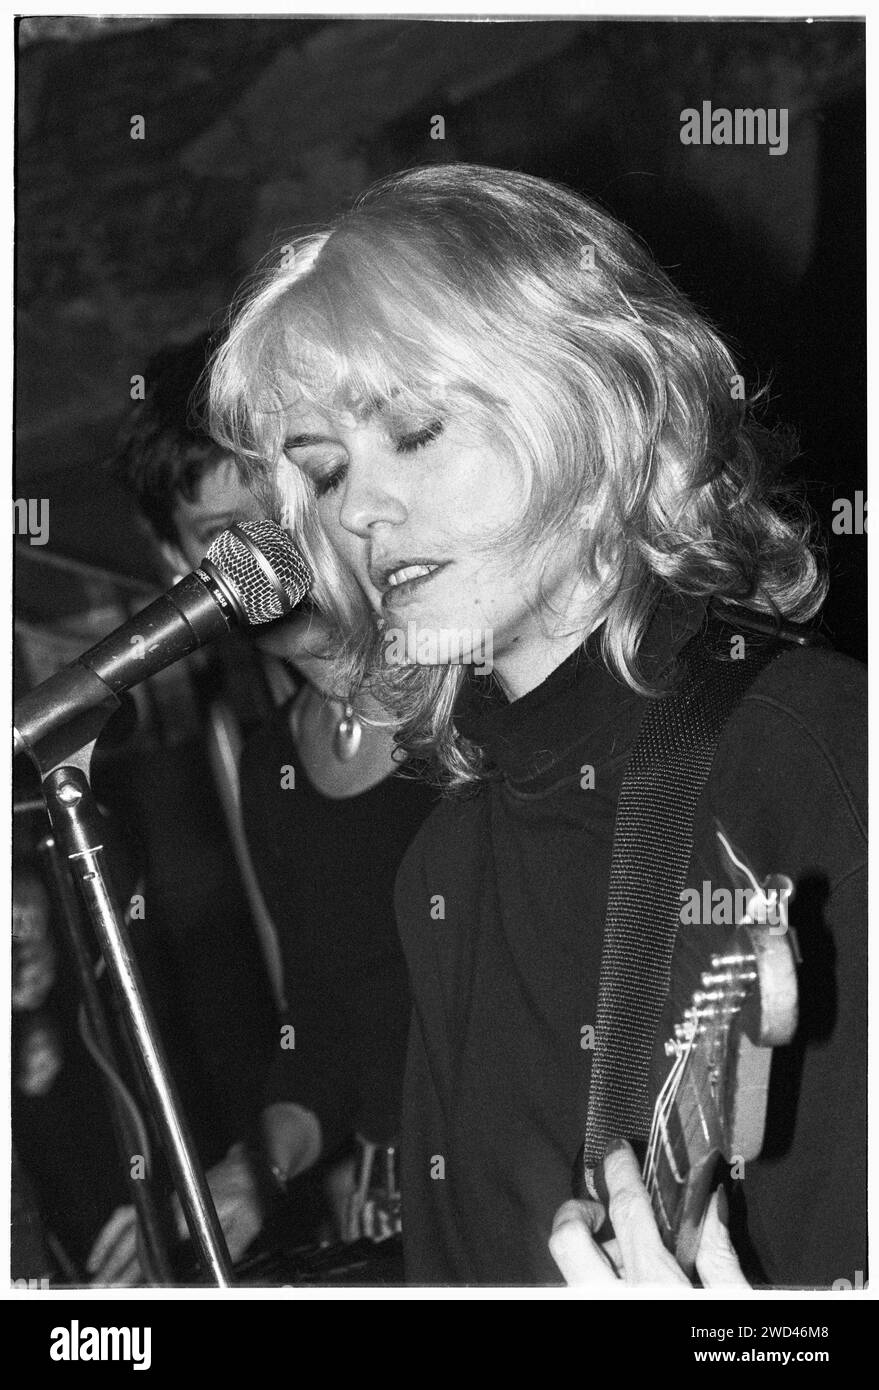 CATATONIA, CONCERT, 1994: A very young Cerys Matthews  of Catatonia playing live at the Legendary TJ’s in Newport, Wales, UK on 9 April 1994. Photo: Rob Watkins. INFO: Catatonia, a Welsh alternative rock band in the '90s, fronted by Cerys Matthews, gained fame with hits like 'Mulder and Scully' and 'Road Rage.' Their eclectic sound, blending pop, rock, and folk, solidified their place in the Britpop era, showcasing Matthews' distinctive vocals. Stock Photo